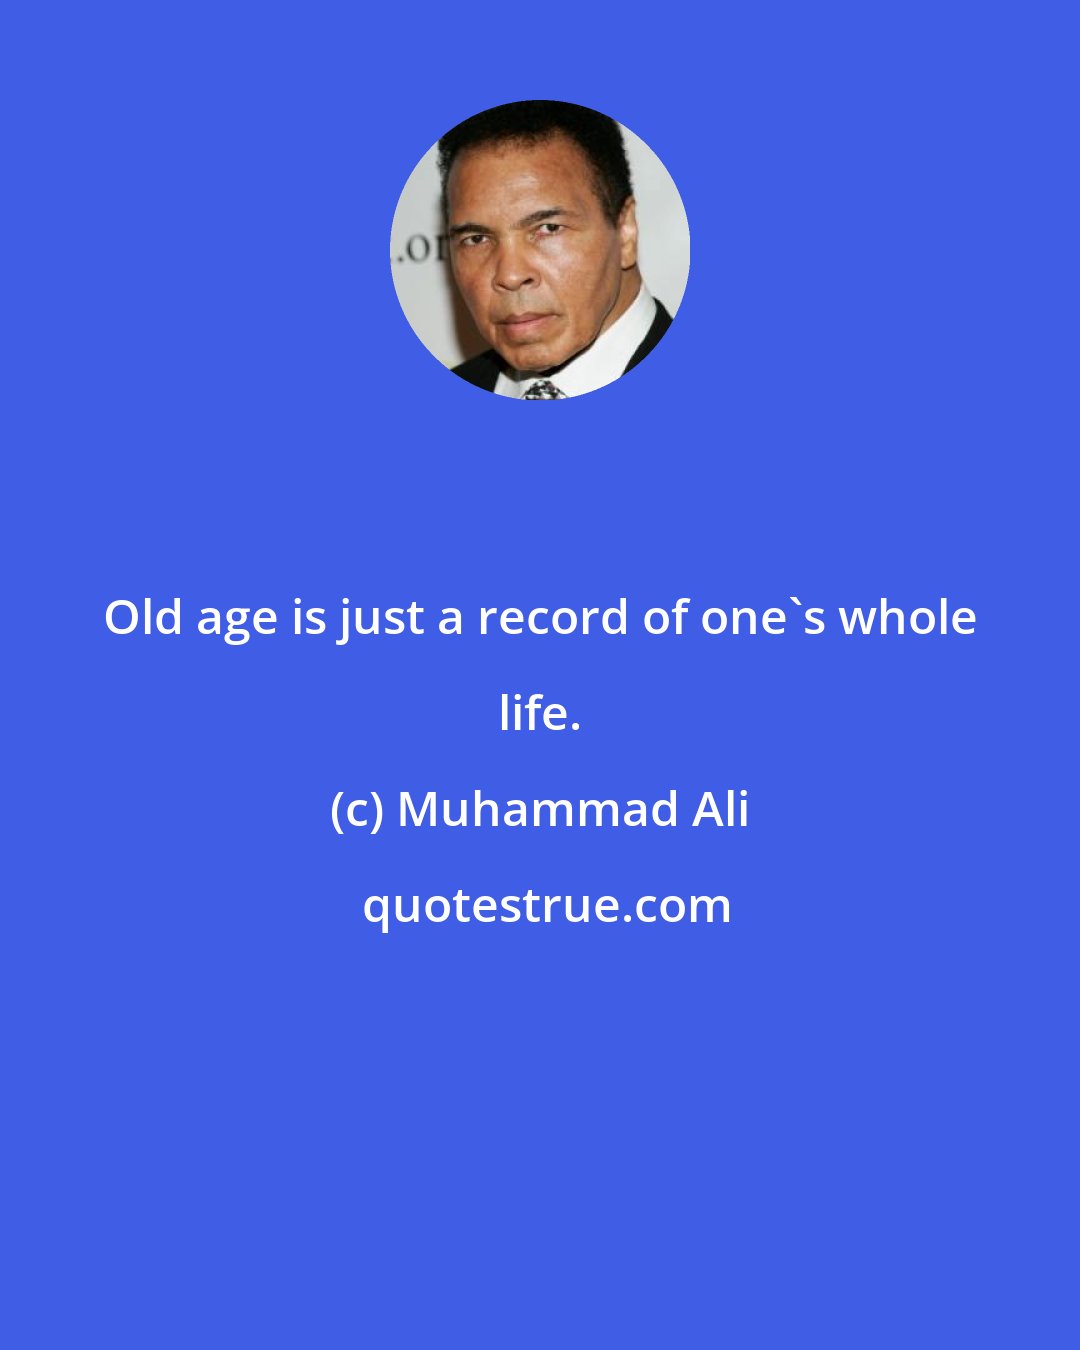 Muhammad Ali: Old age is just a record of one's whole life.